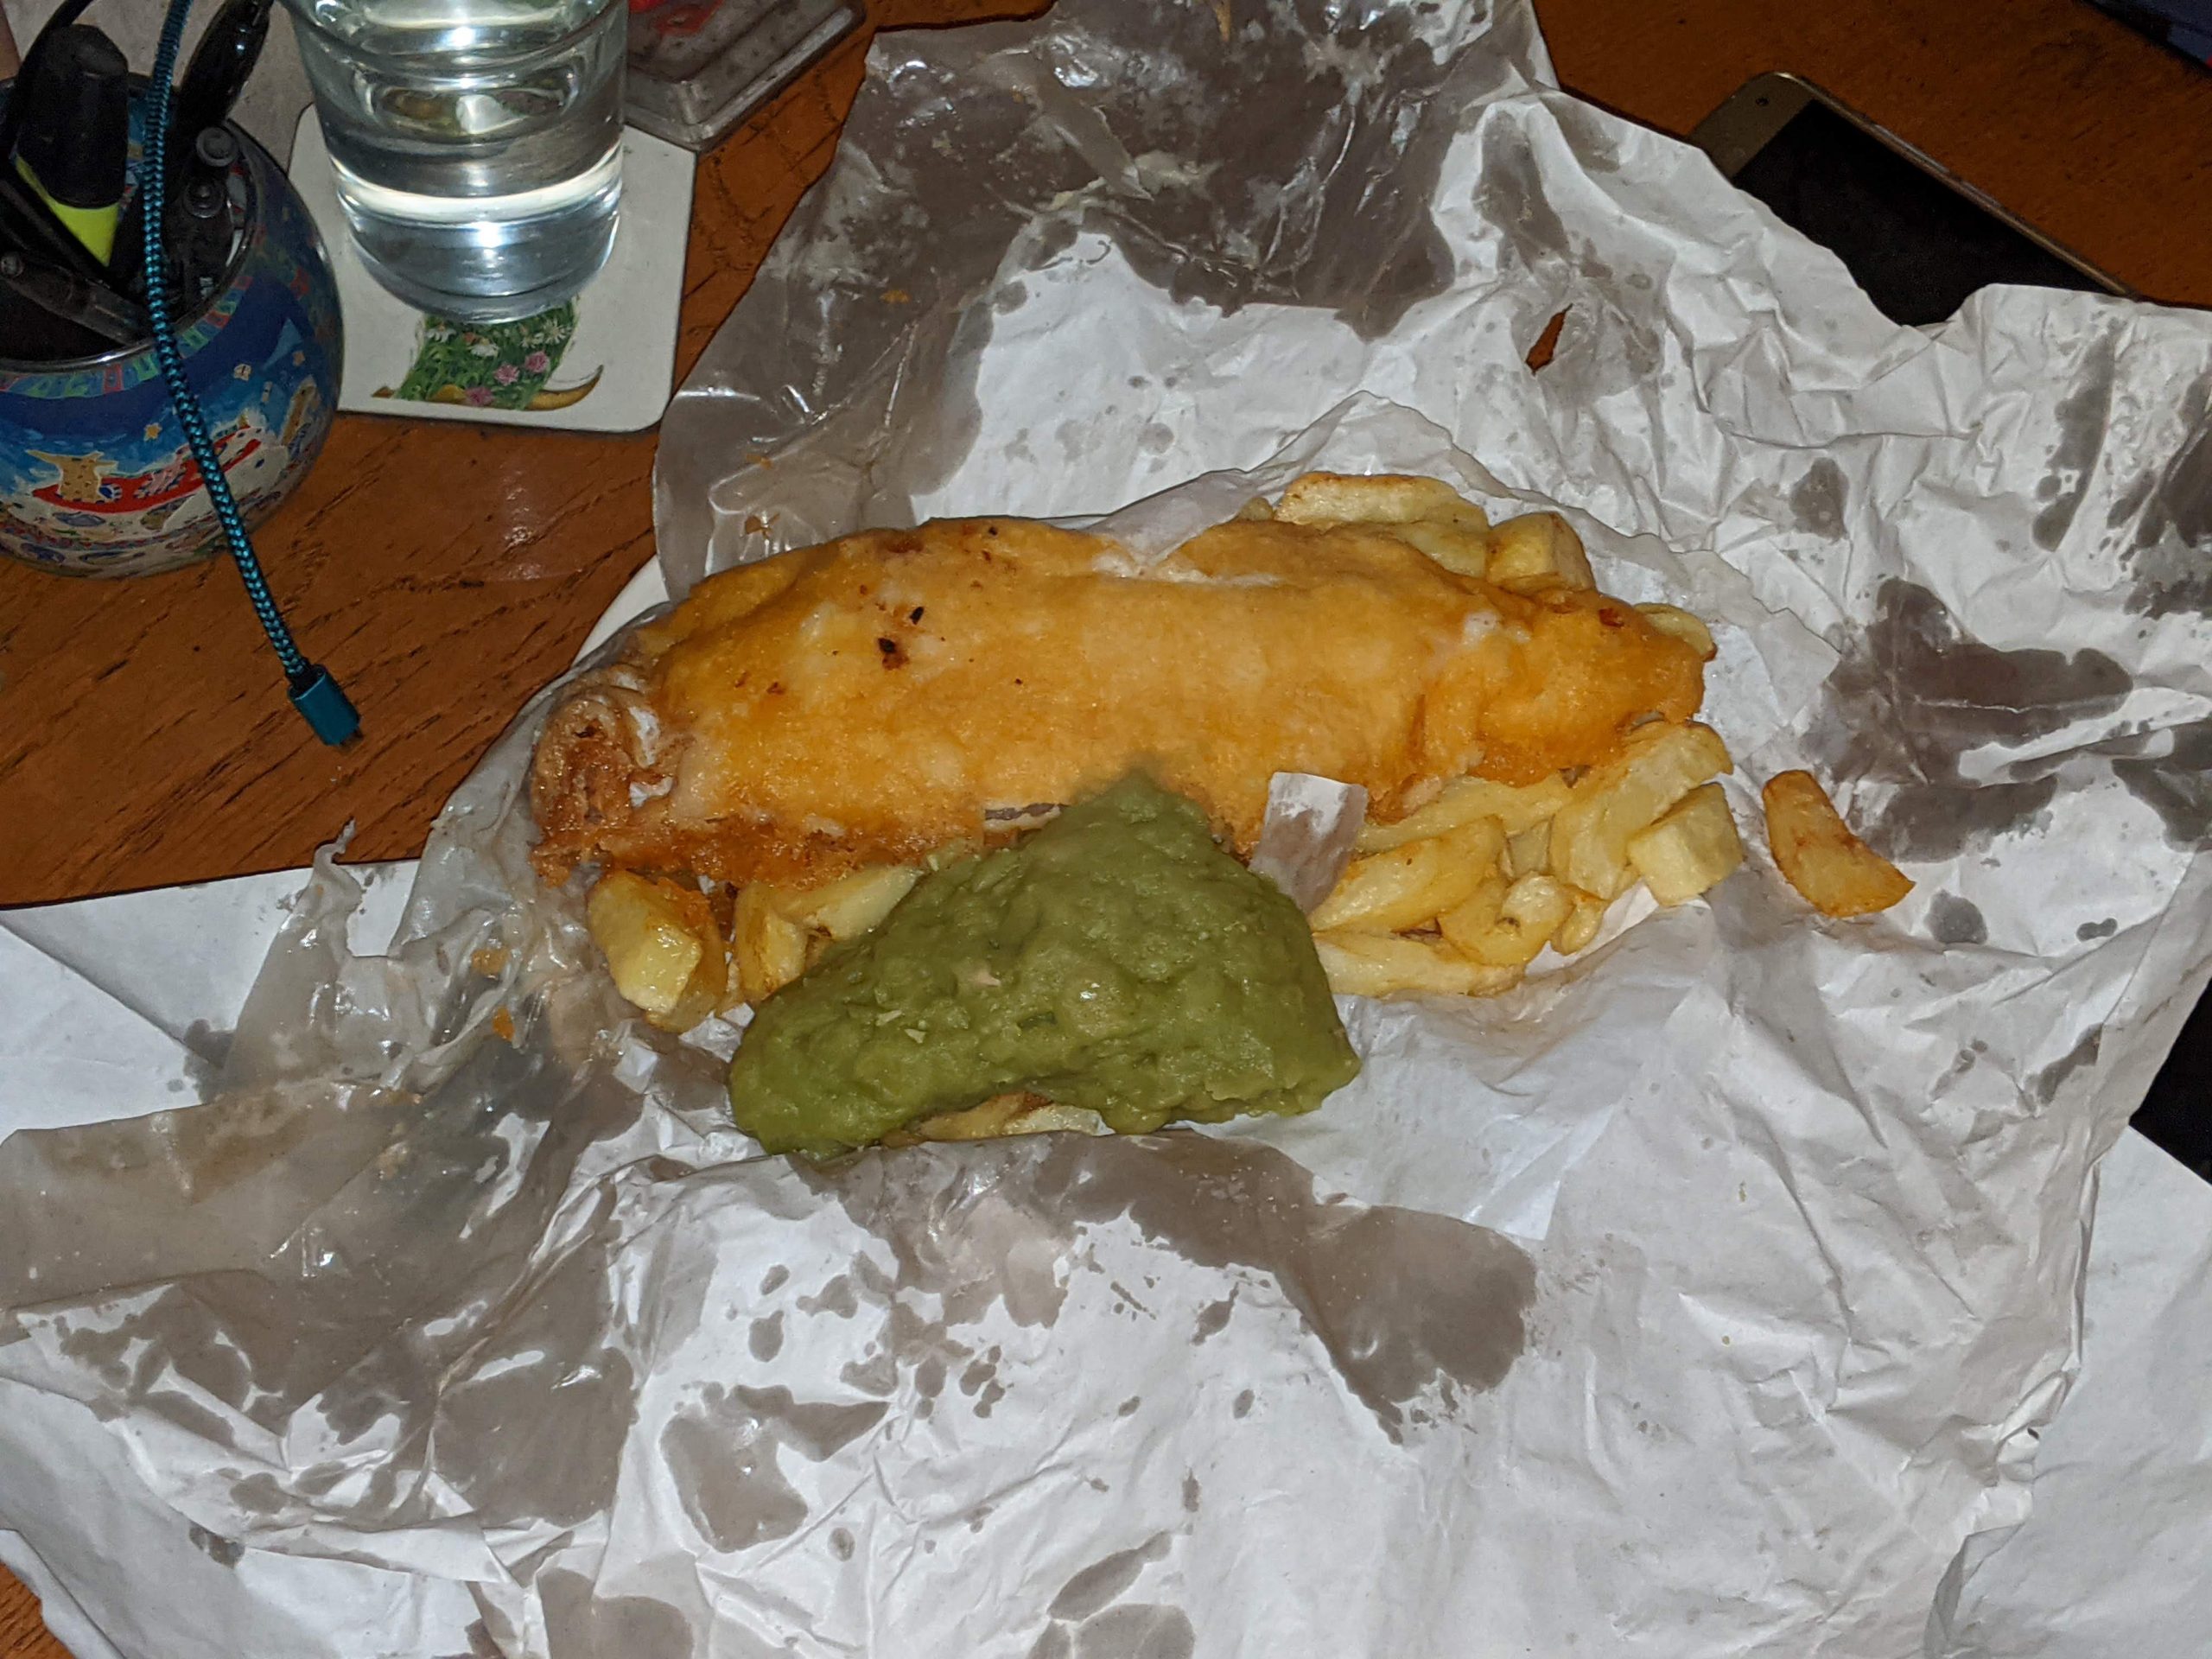 Fish and Chips, from Batter of Bosworth 12/02/2021